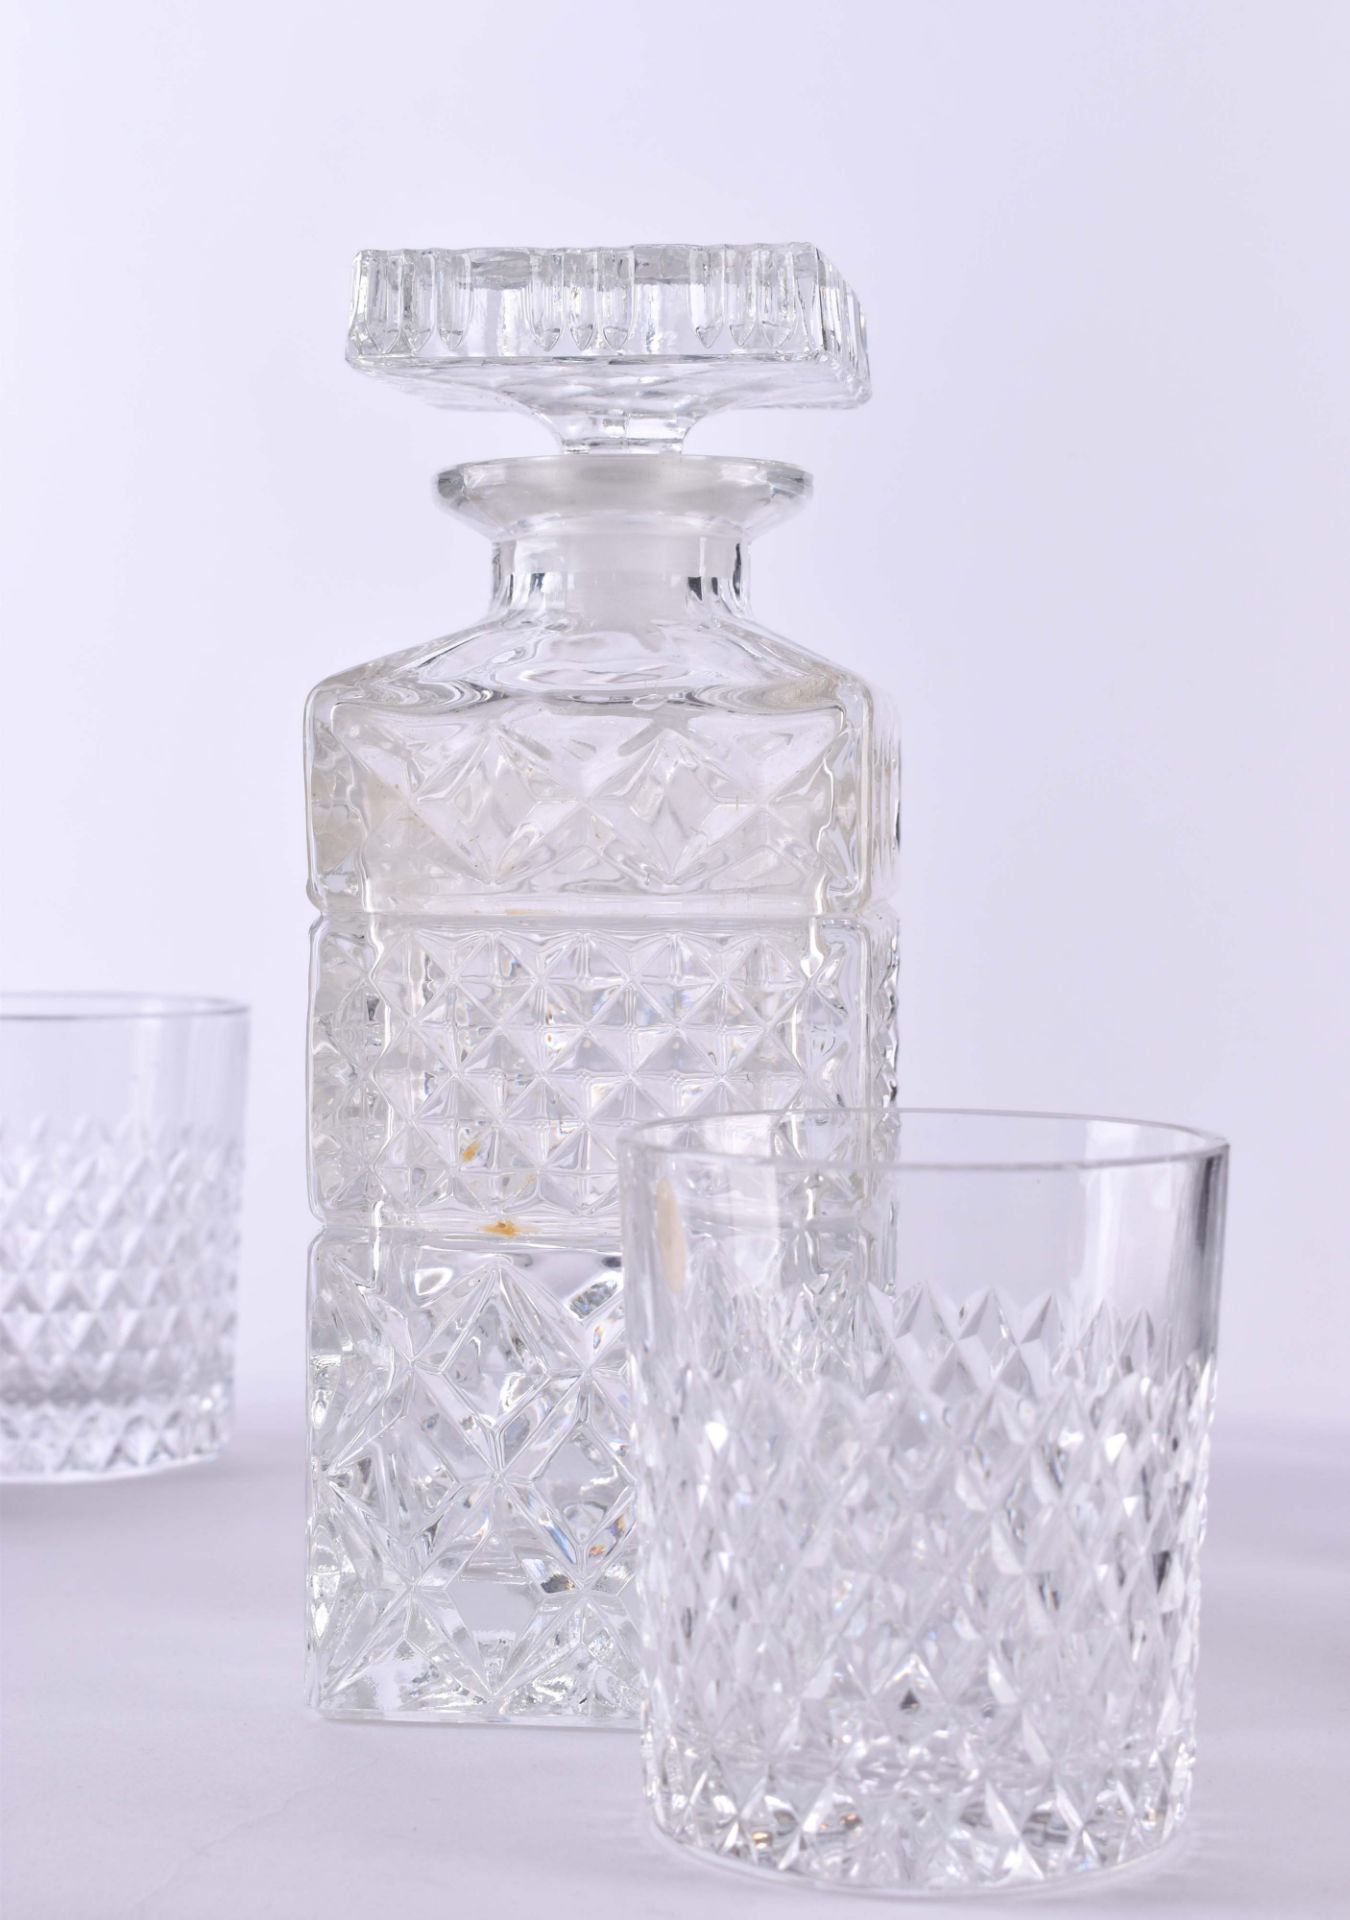 Whiskey carafe with 6 glasses - Image 4 of 5